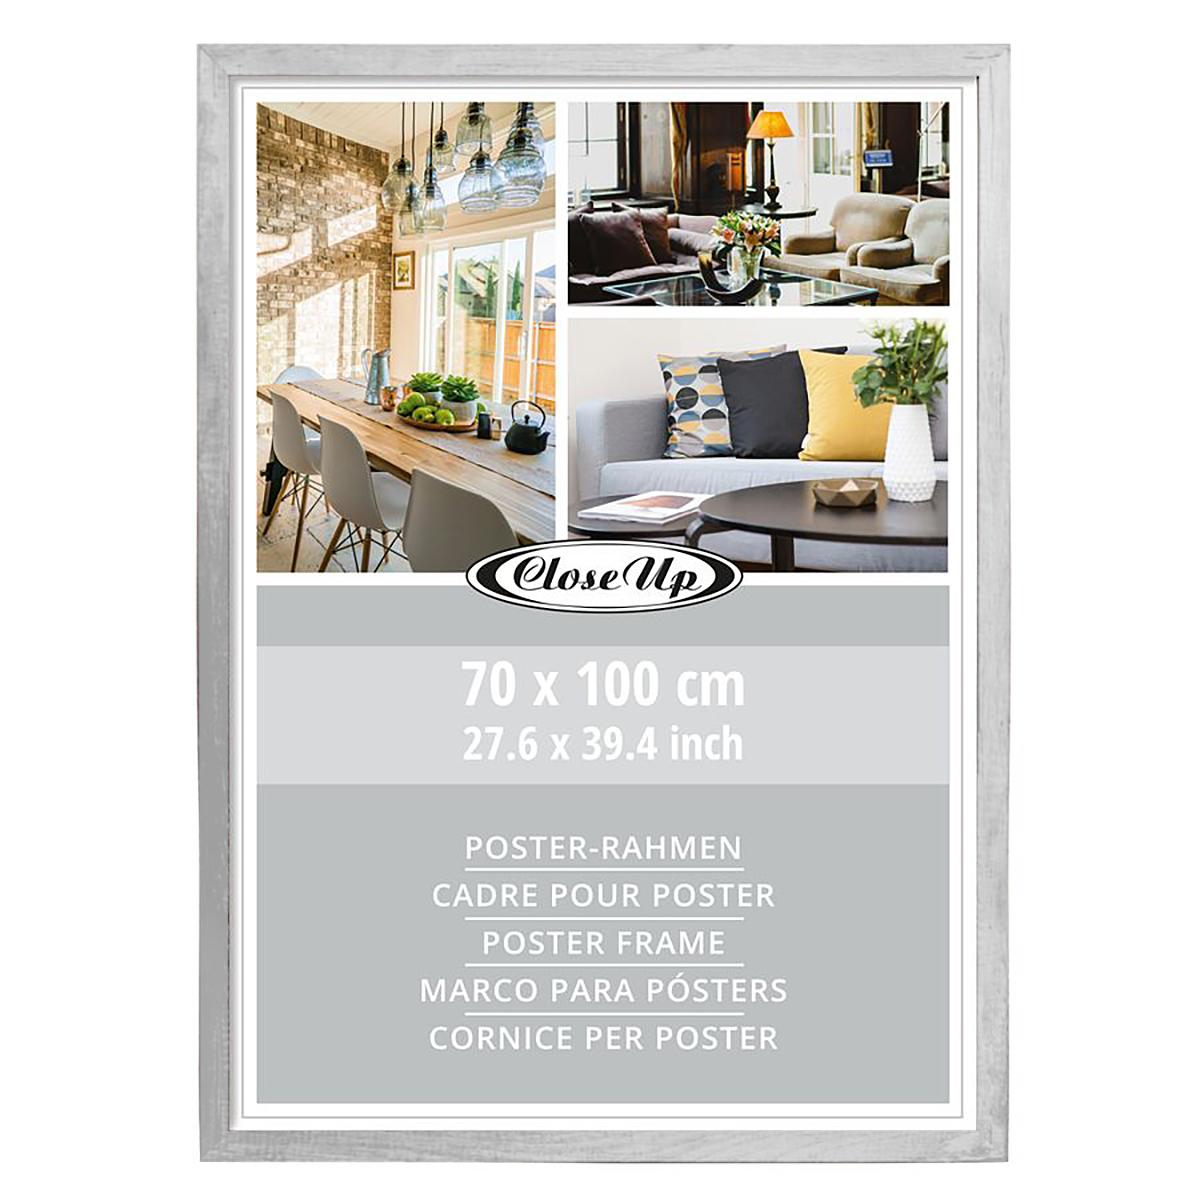 Poster frame 70 x 100 cm wood decor silver – Wallister - Poster & More